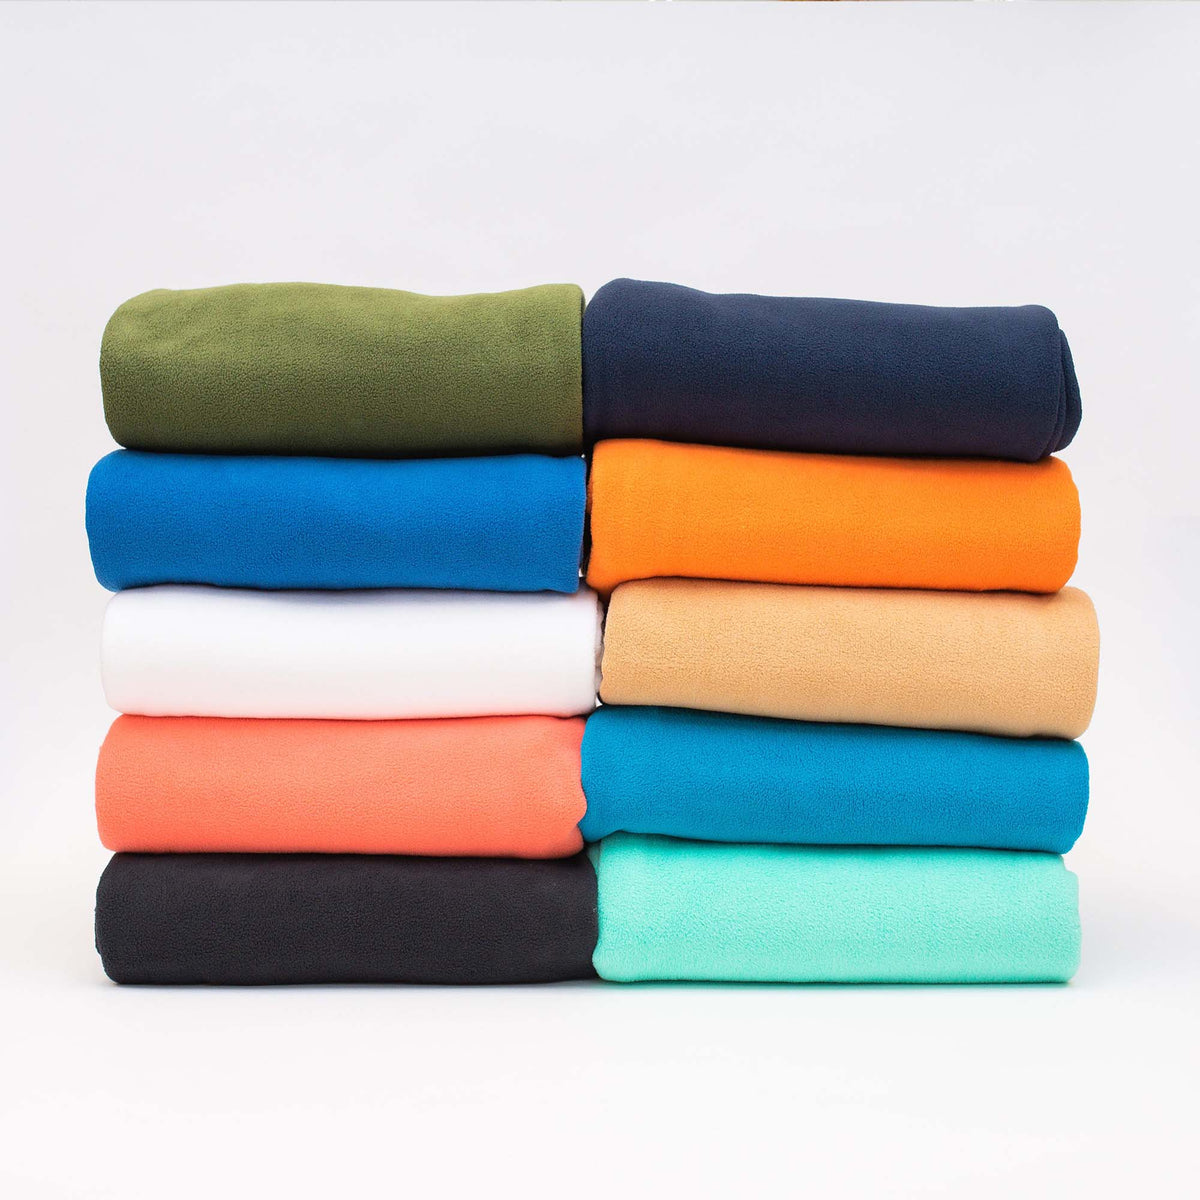 Assorted Colors of Biggest, Oversized, Fleece Blankets - Peaceful Touch